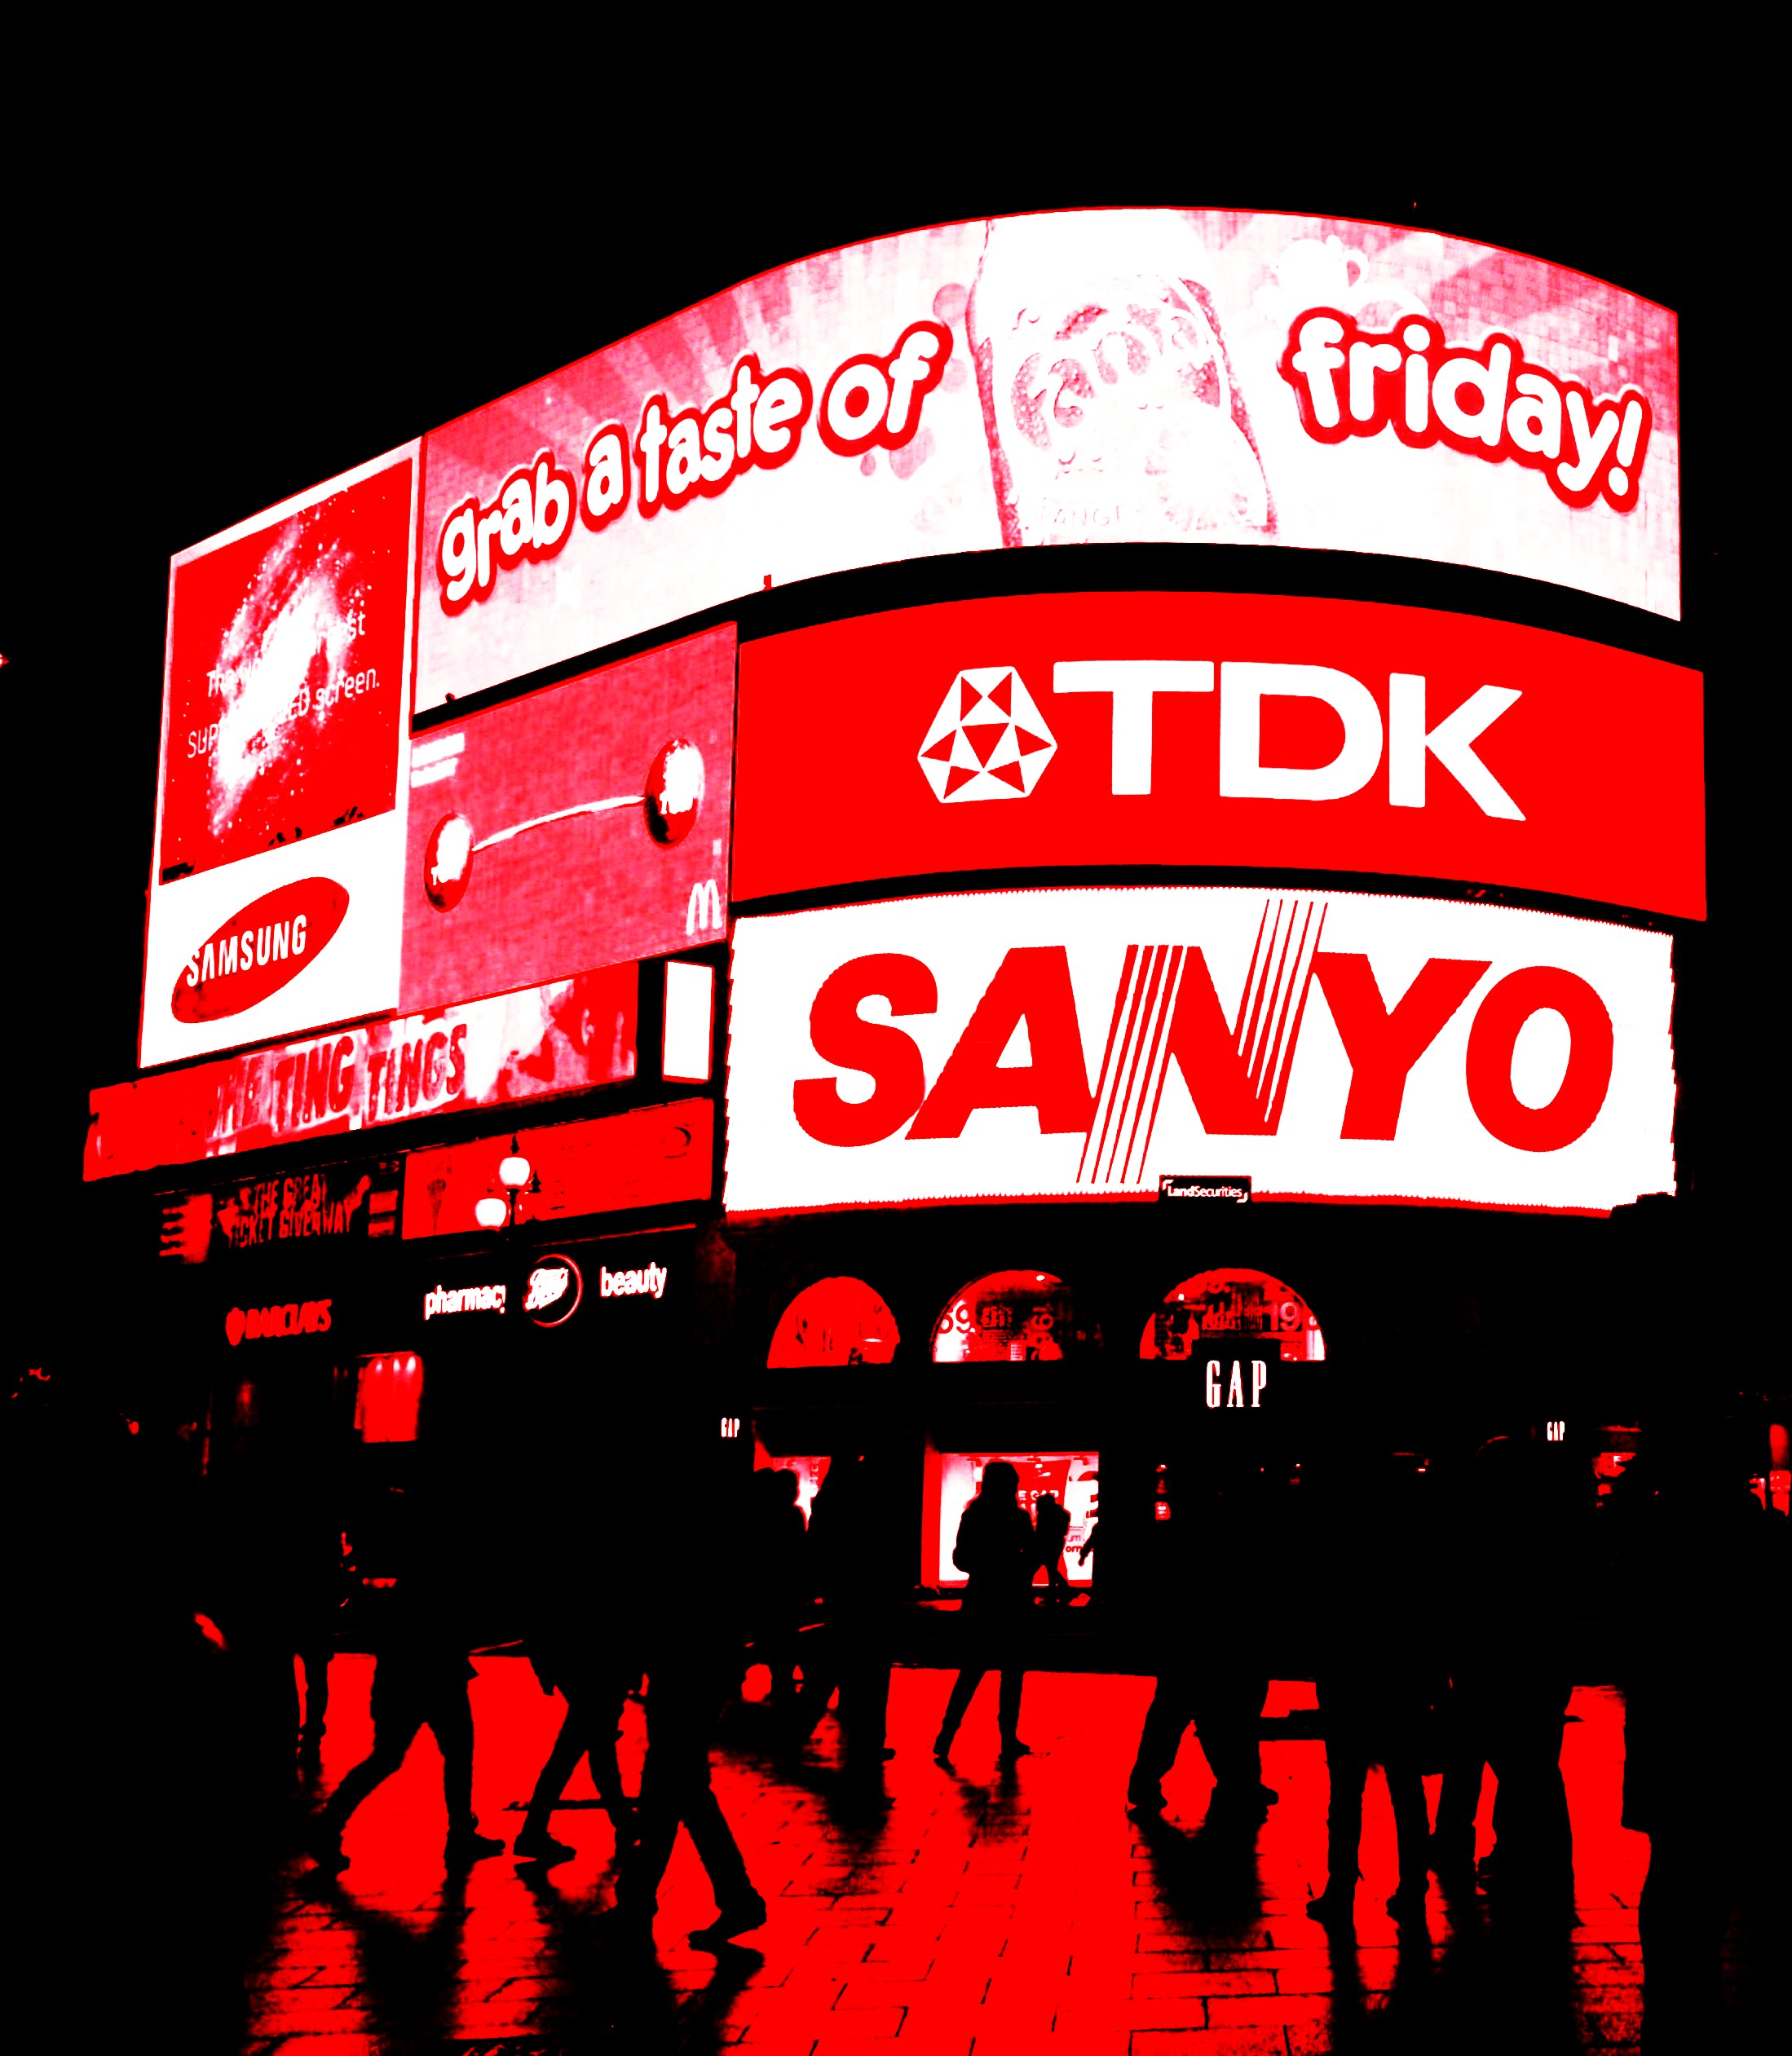 Piccadilly Circus London.jpg - Piccadilly Circus Photo at Night, Romantic Photos Of Piccadilly Circus London, Piccadilly Circus Pop Art Images, Piccadilly Circus Images, by PopArtMediaProductions